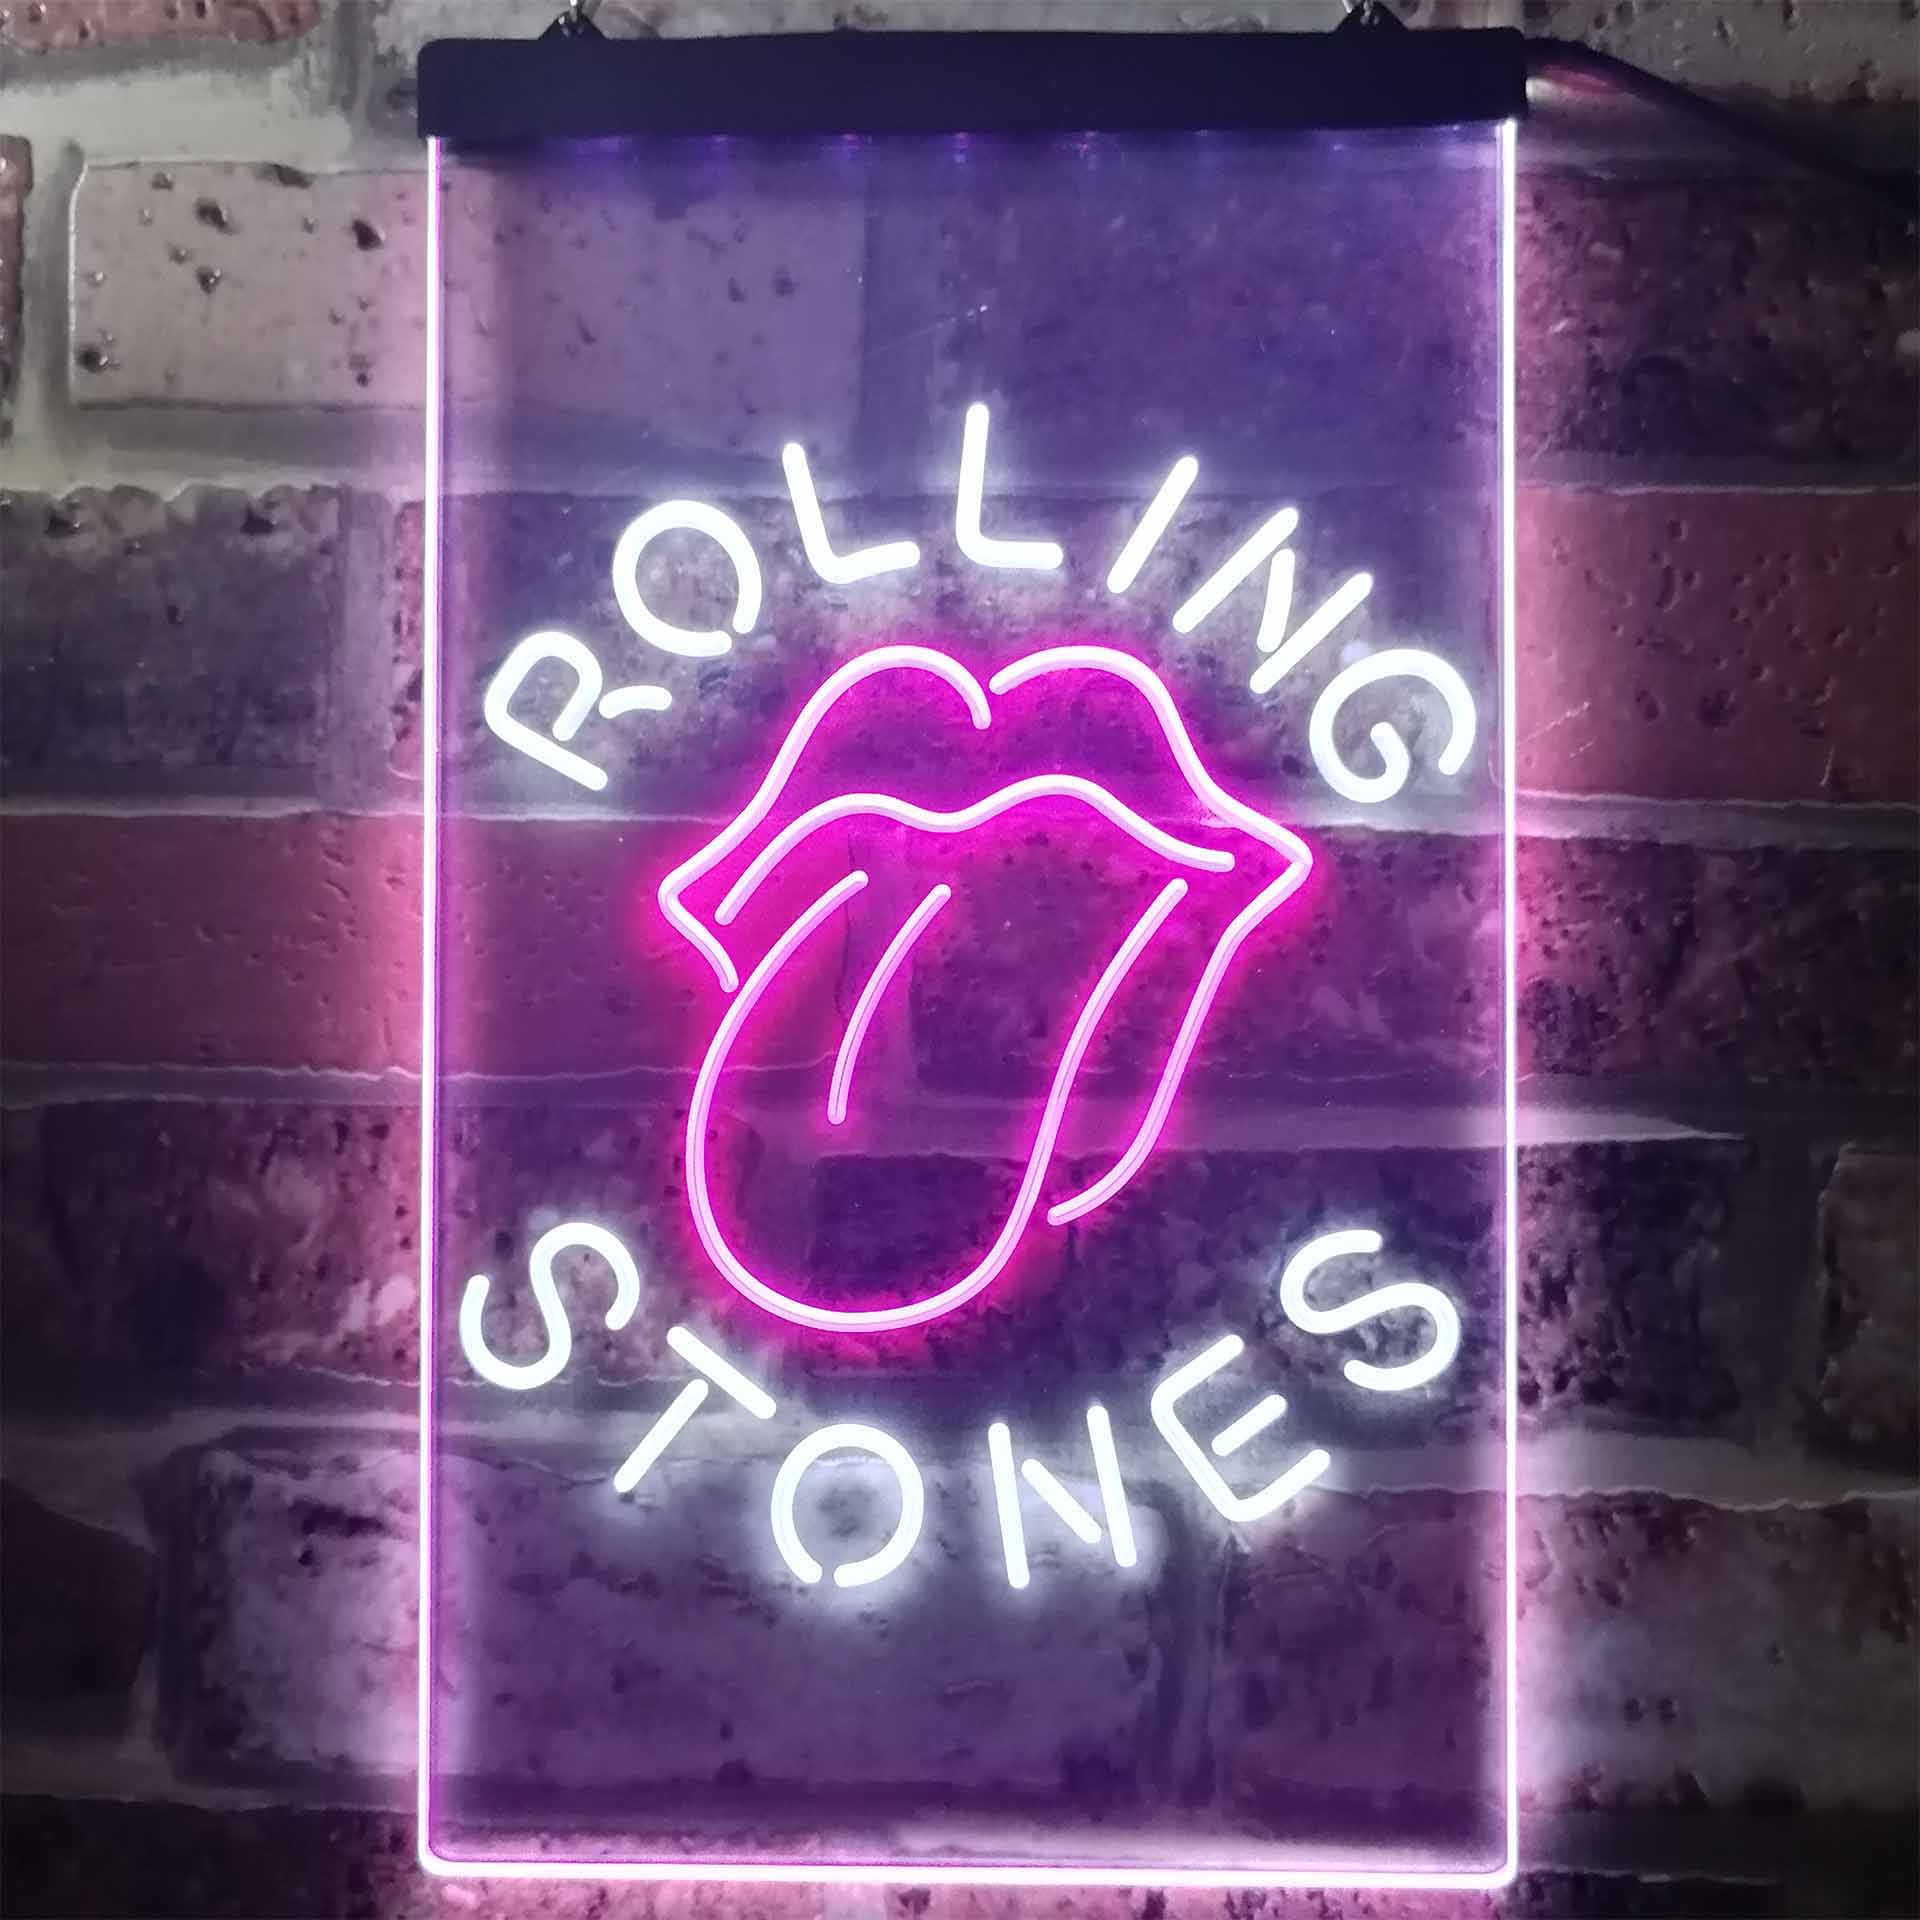 Rolling Stones Band Neon-Like LED Sign